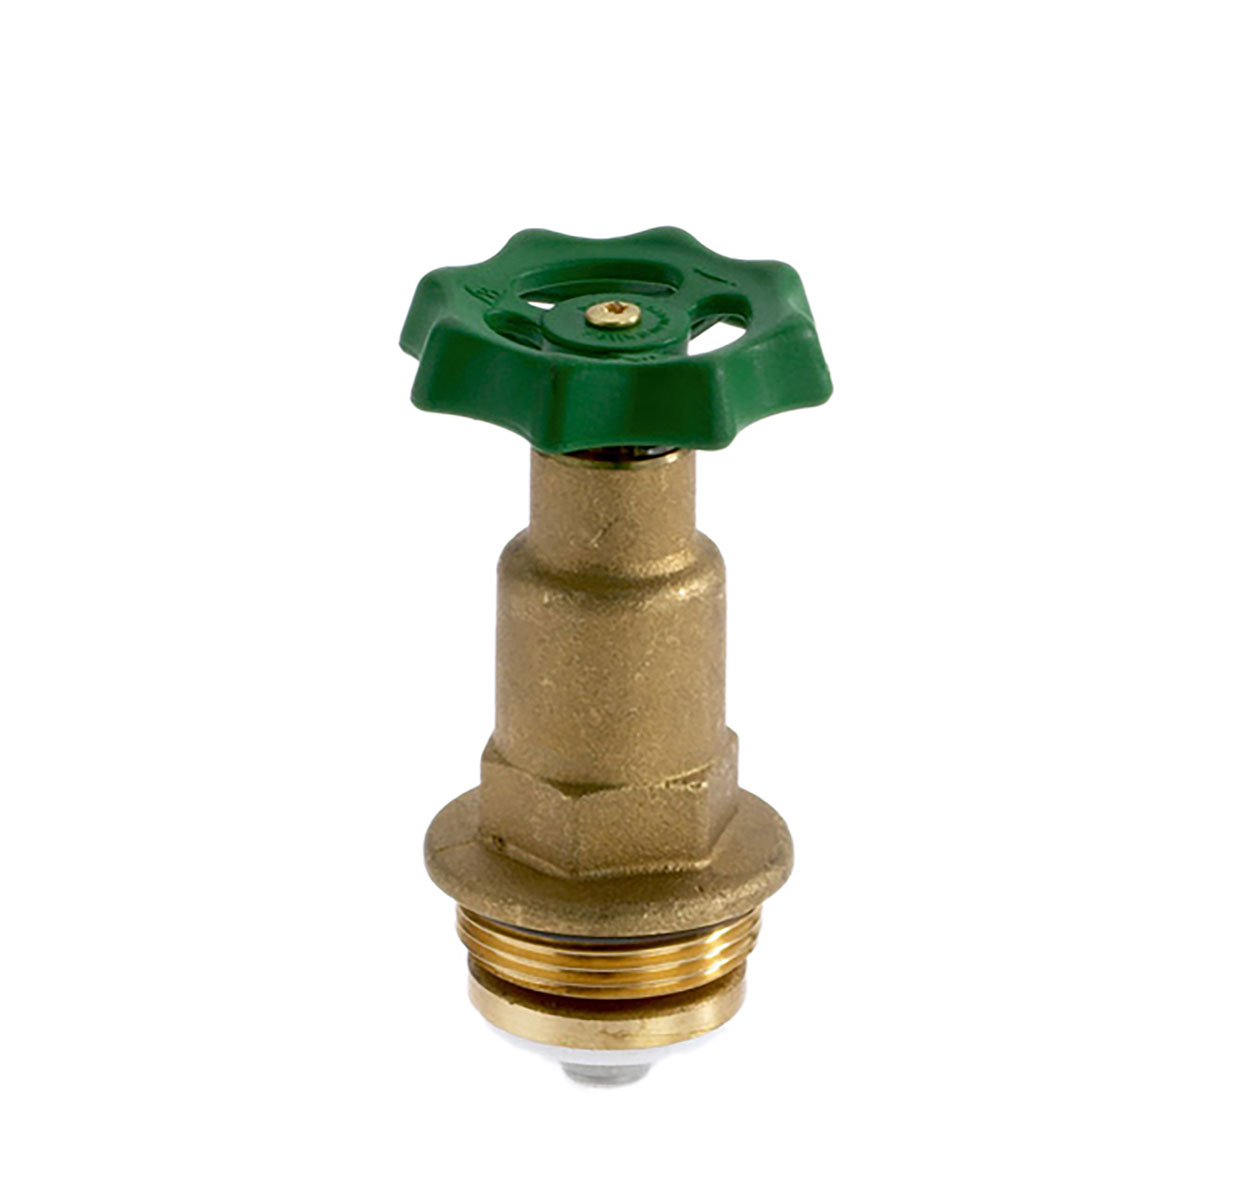 1227400 - Brass Upper-part with grease chamber with PTFE (Teflon) flat seal, for free-flow valves, non-rising spindle